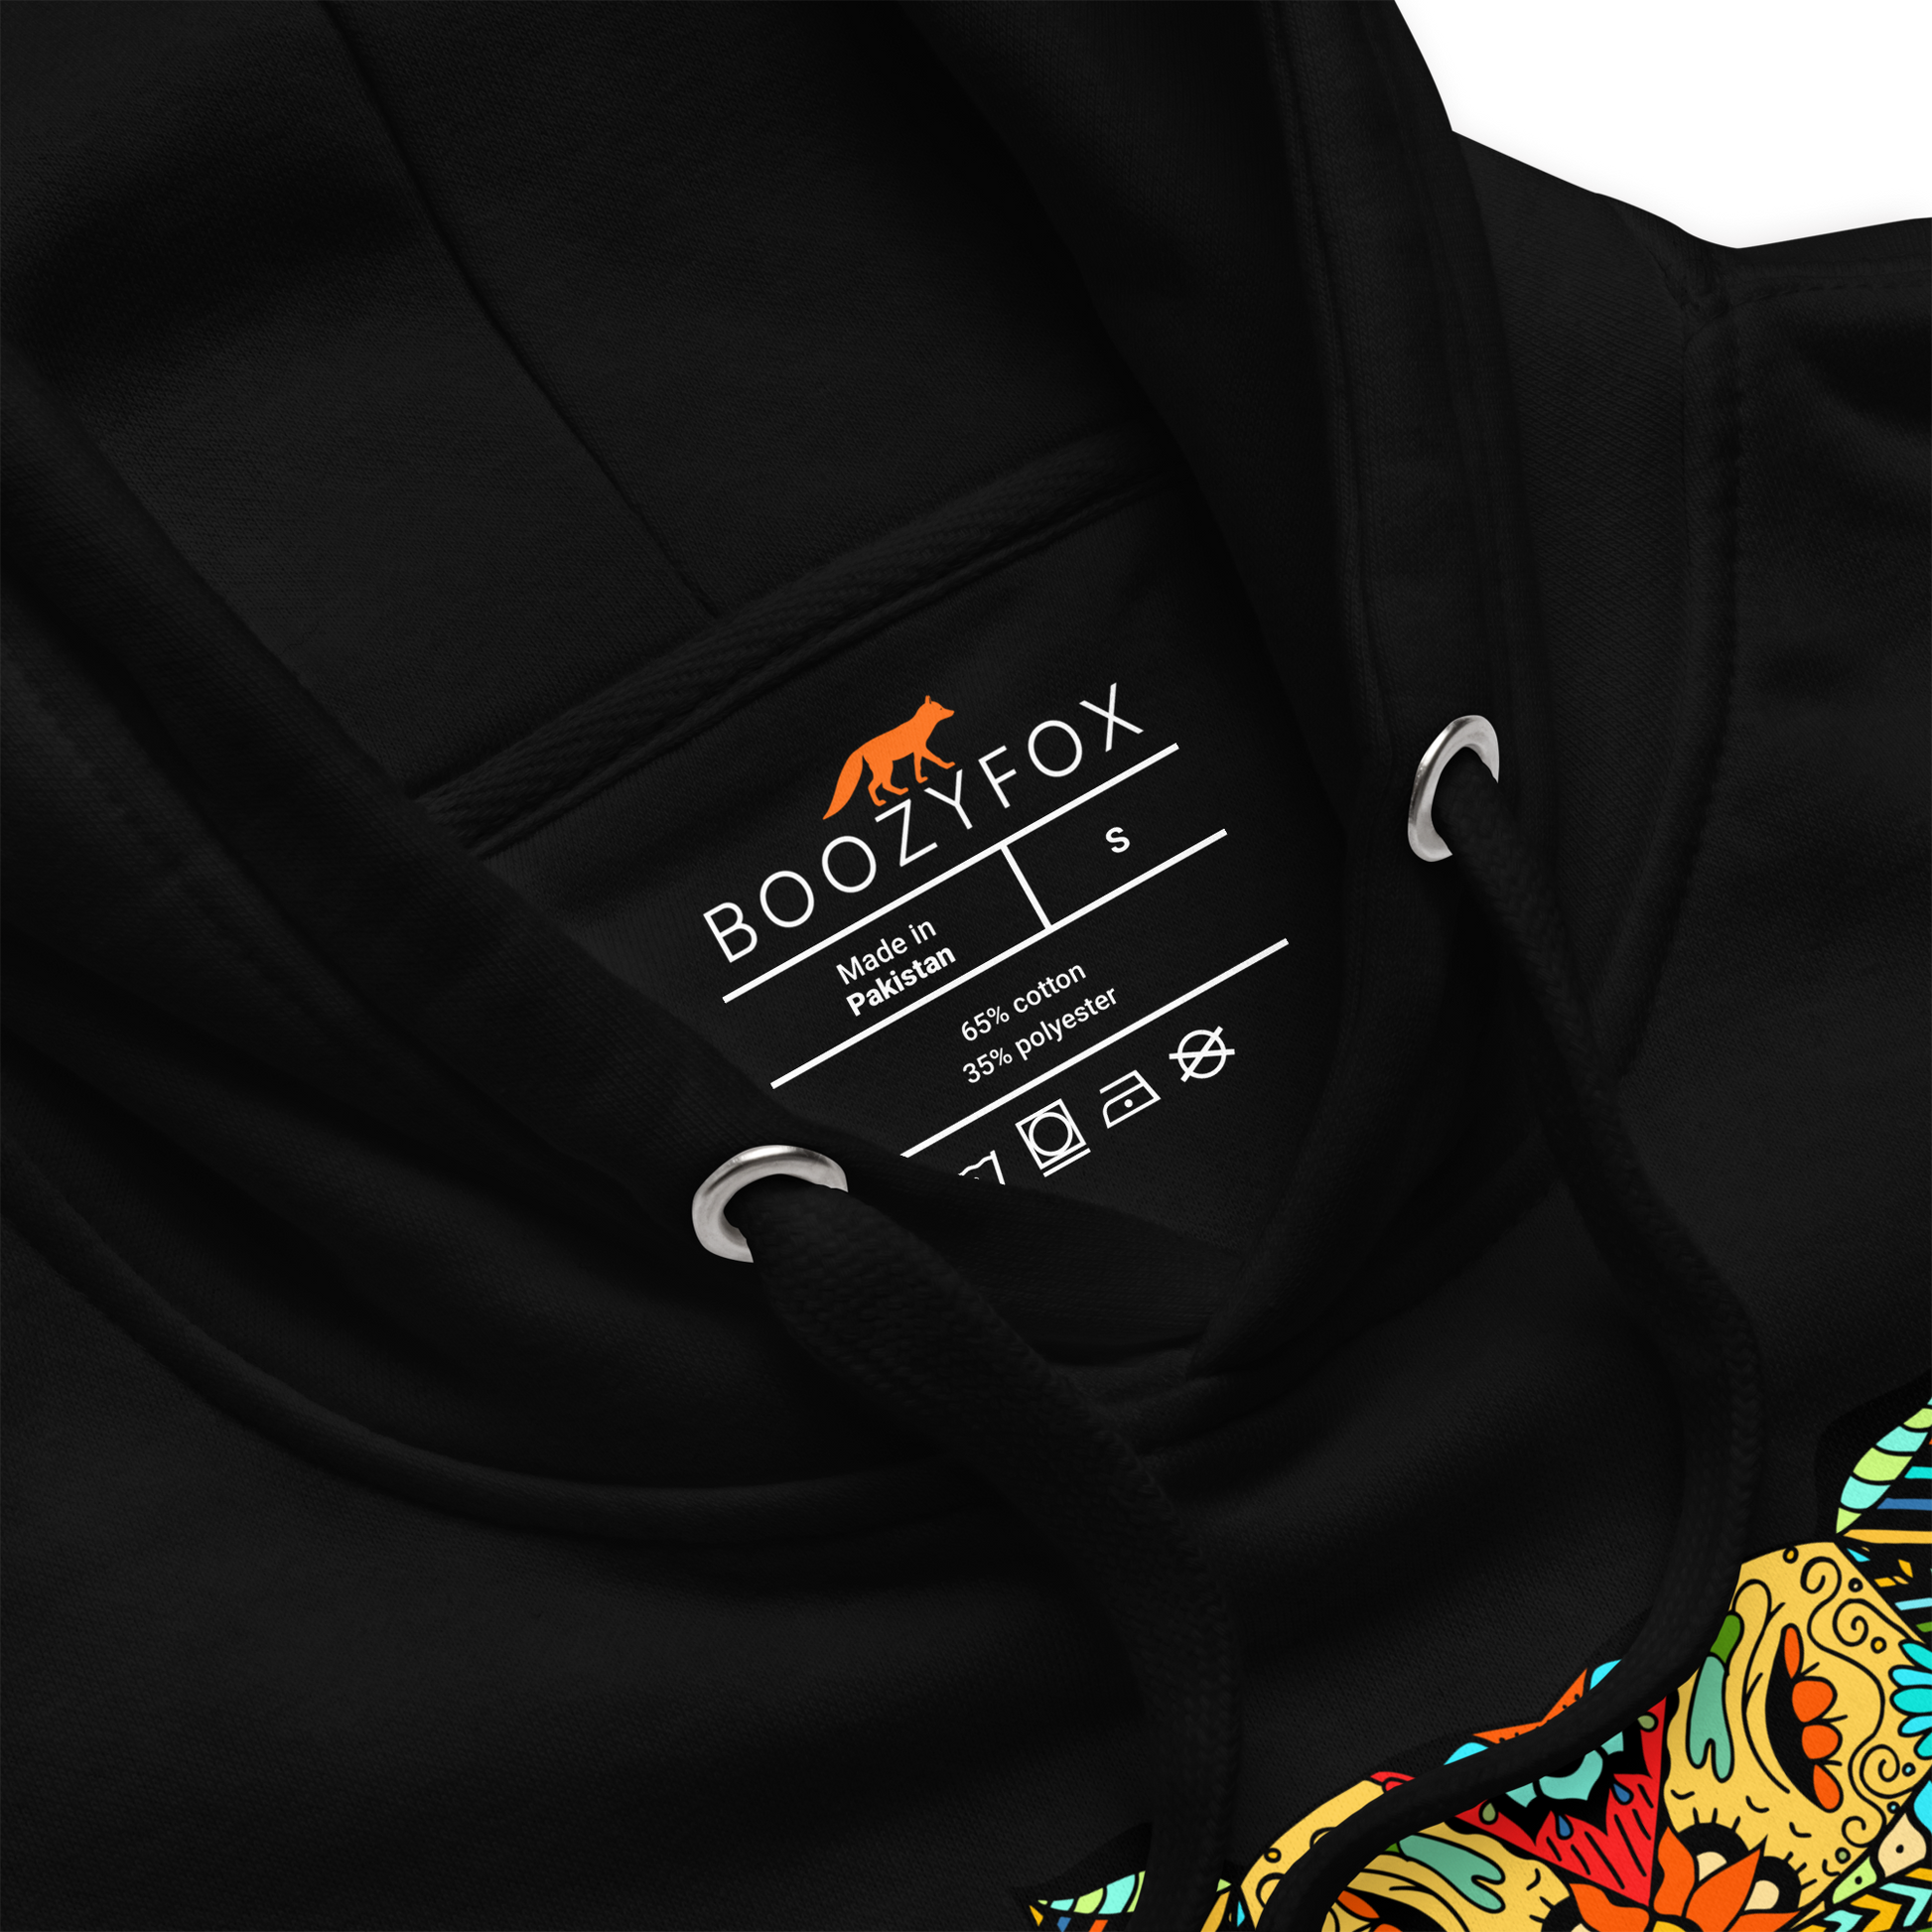 Product details of a Black Premium Hippo Hoodie featuring a vibrant Zentangle Hippo graphic on the chest - Cool Graphic Hippo Hoodies - Boozy Fox